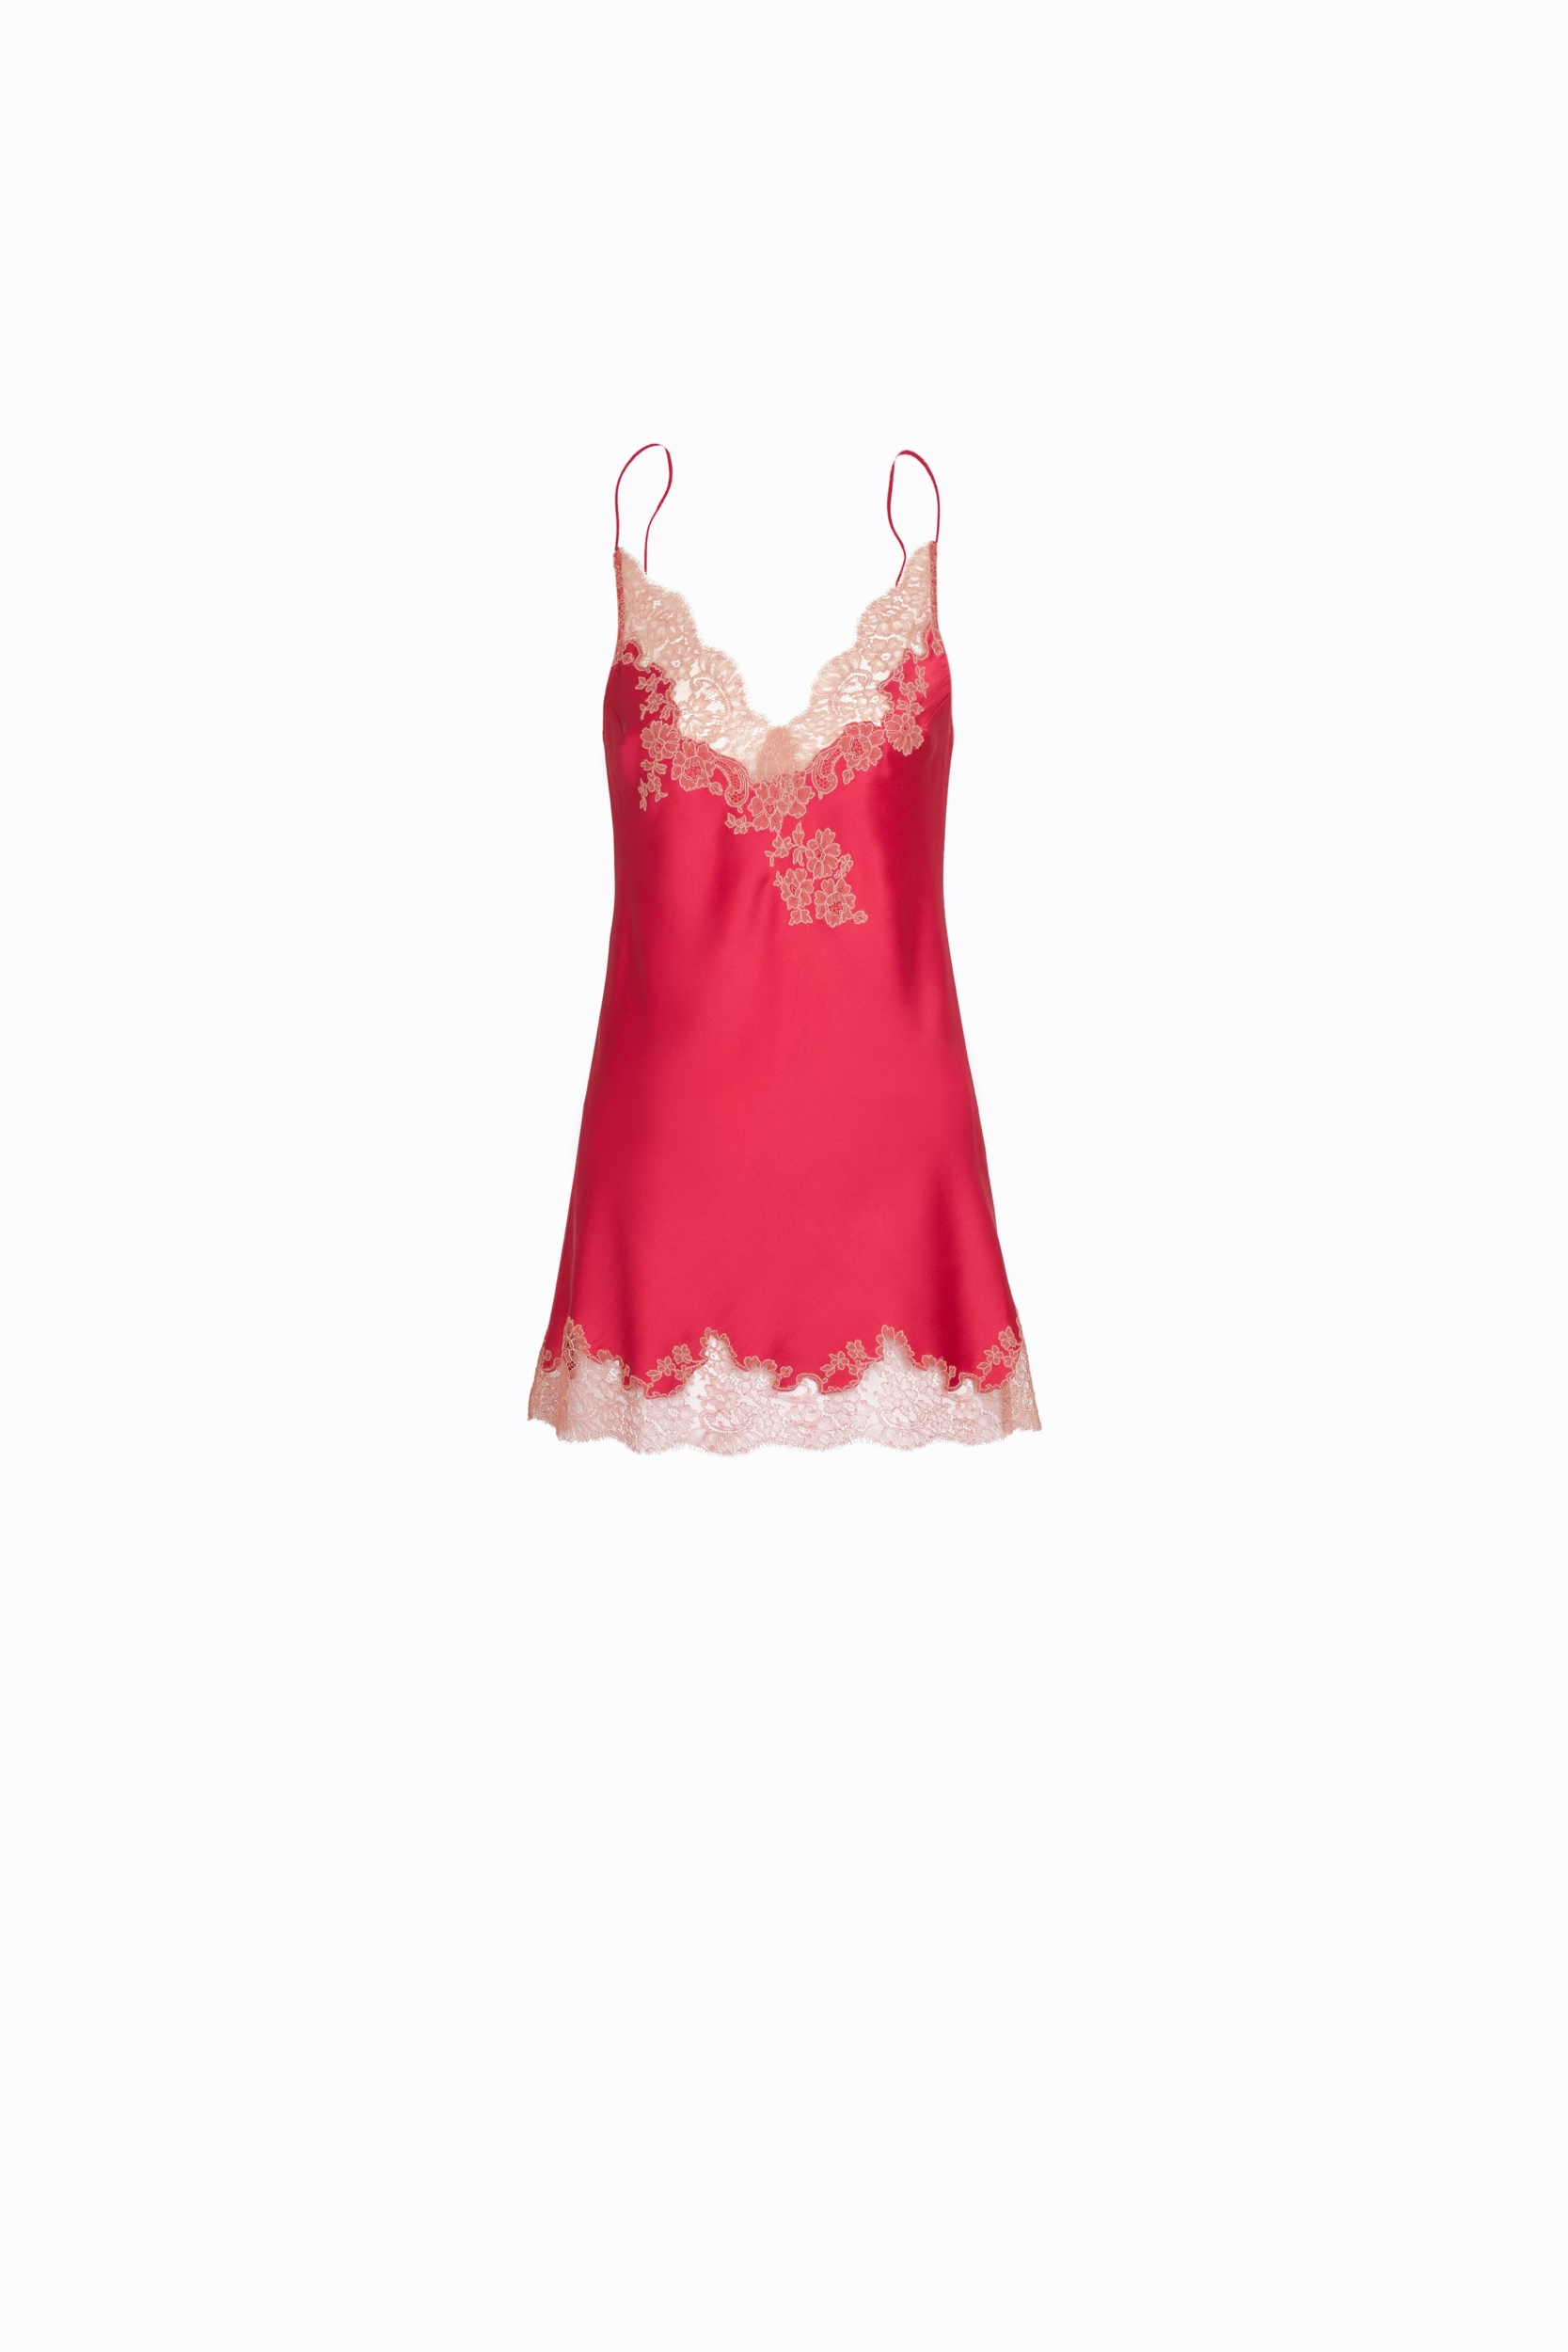 Short silk slip dress - Love red and dusty pink Ceres lace - Carine Gilson